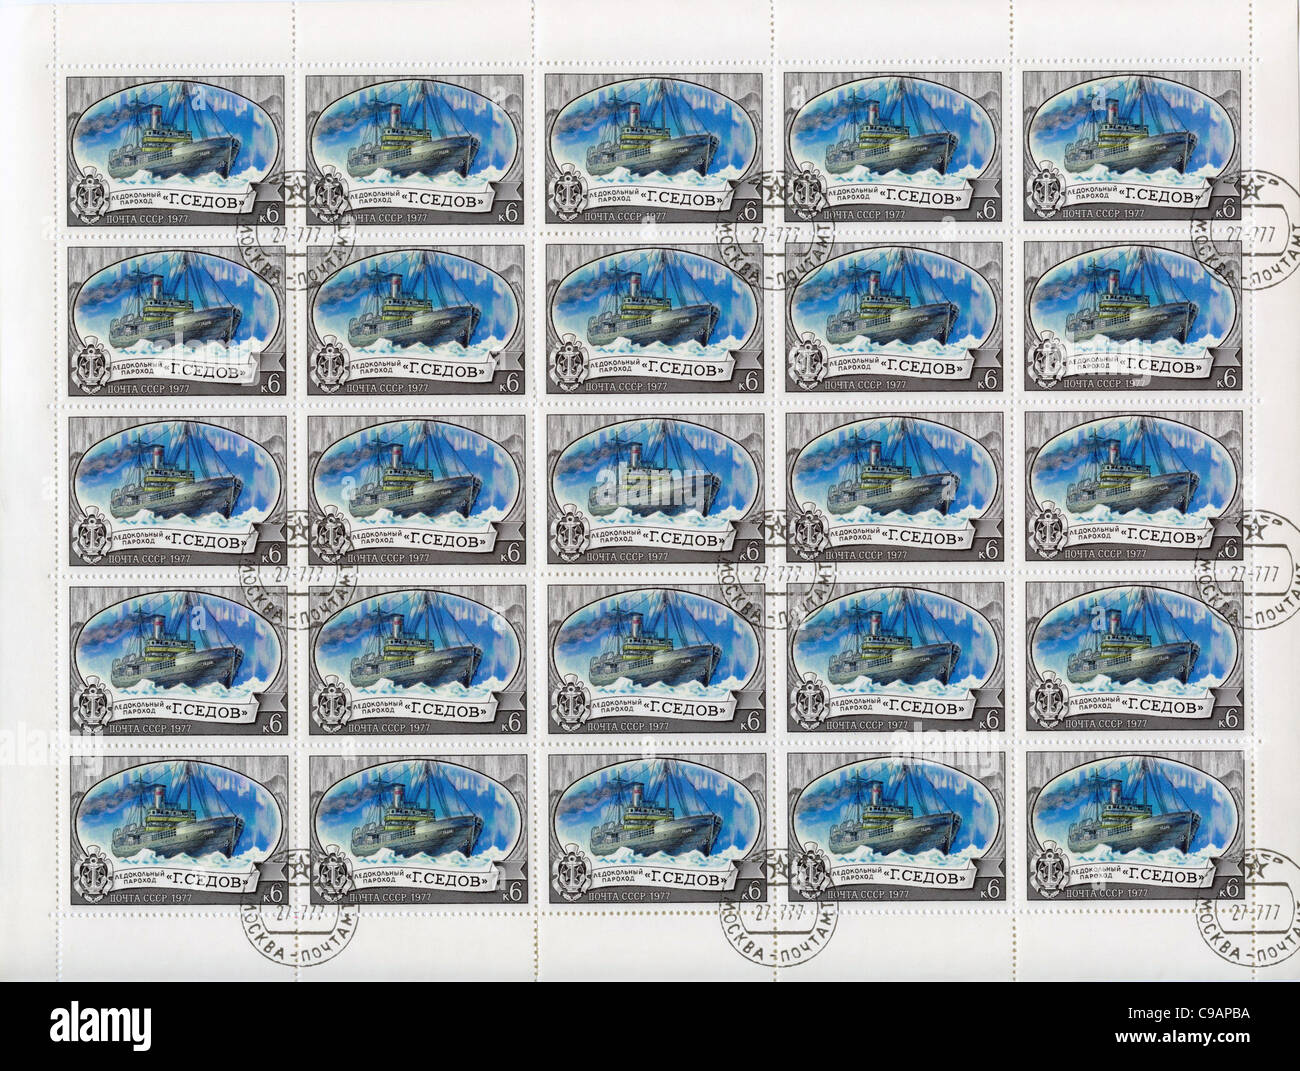 USSR postage stamp sheet Stock Photo